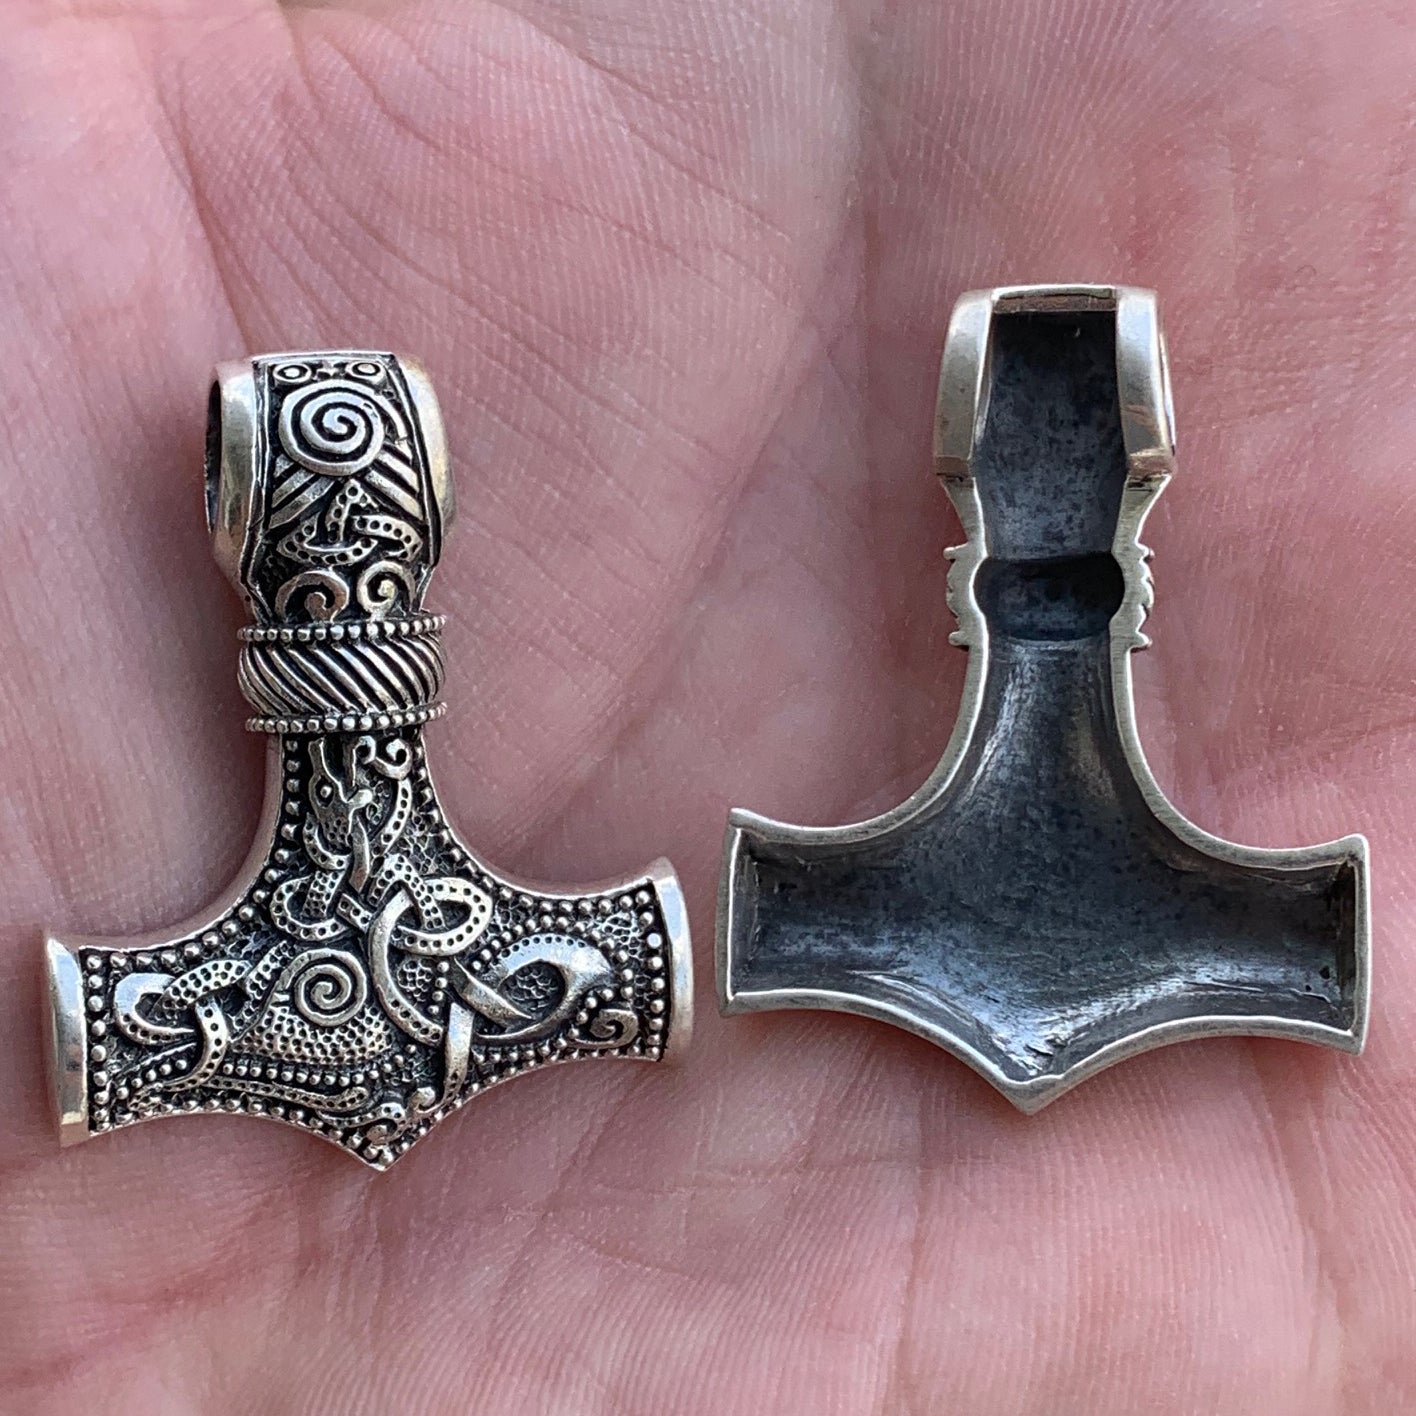 Amazon.com: Huge Viking Thors Hammer Necklace - 925 Sterling Silver - Axe  Odin Mjolnir Pendant - Mens Gothic Pagan Norse Mythology Jewelry for Men -  Fathers Day Gifts - Handmade - 1.2 oz (34 g) : Handmade Products